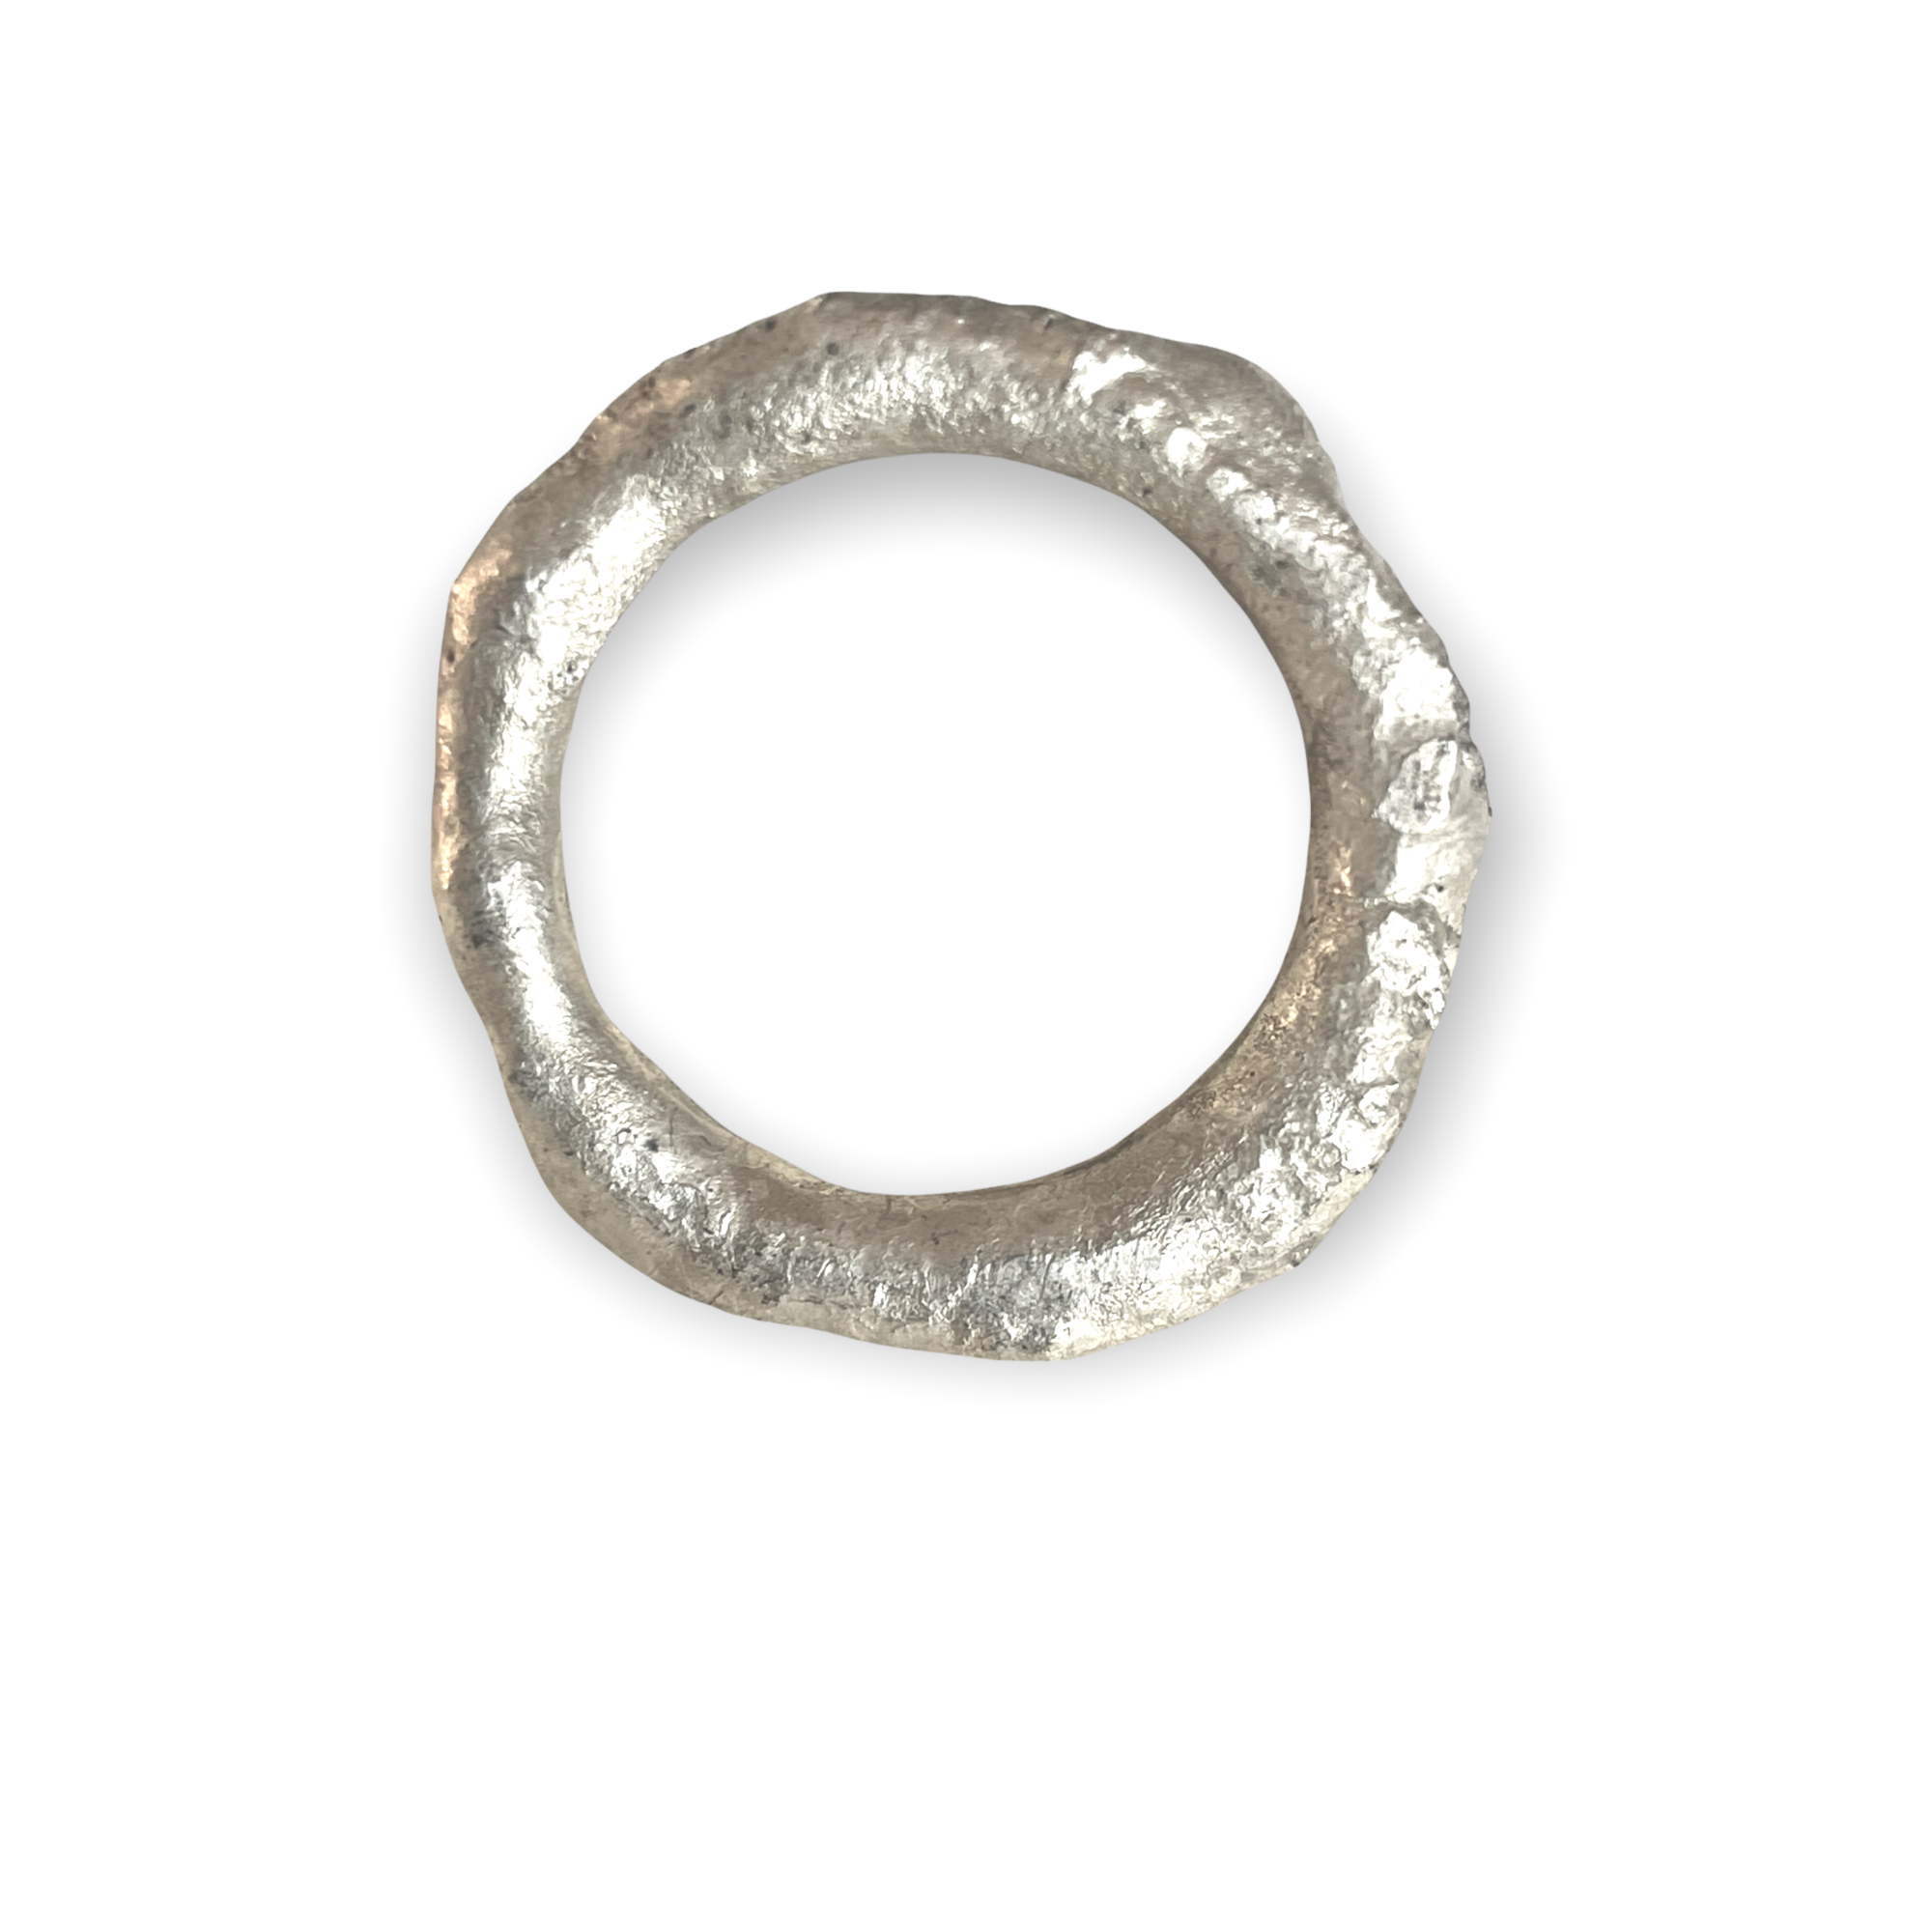 Moonlight Ring - made of recycled Silver